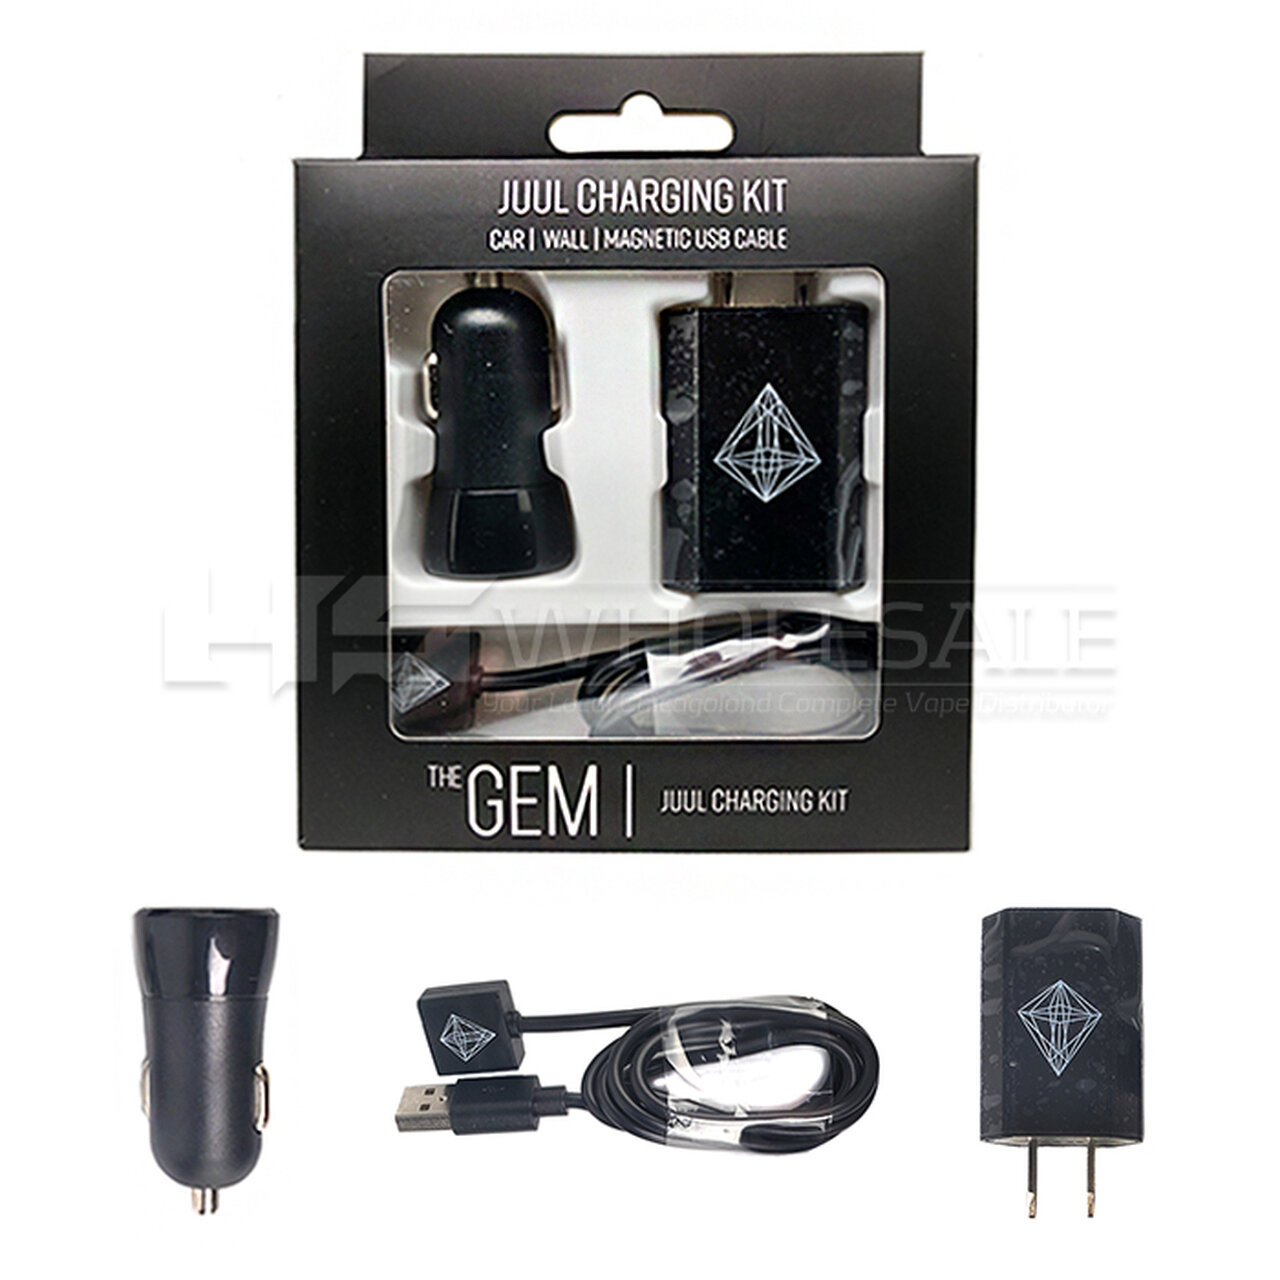 The GEM Juul Charger Kit